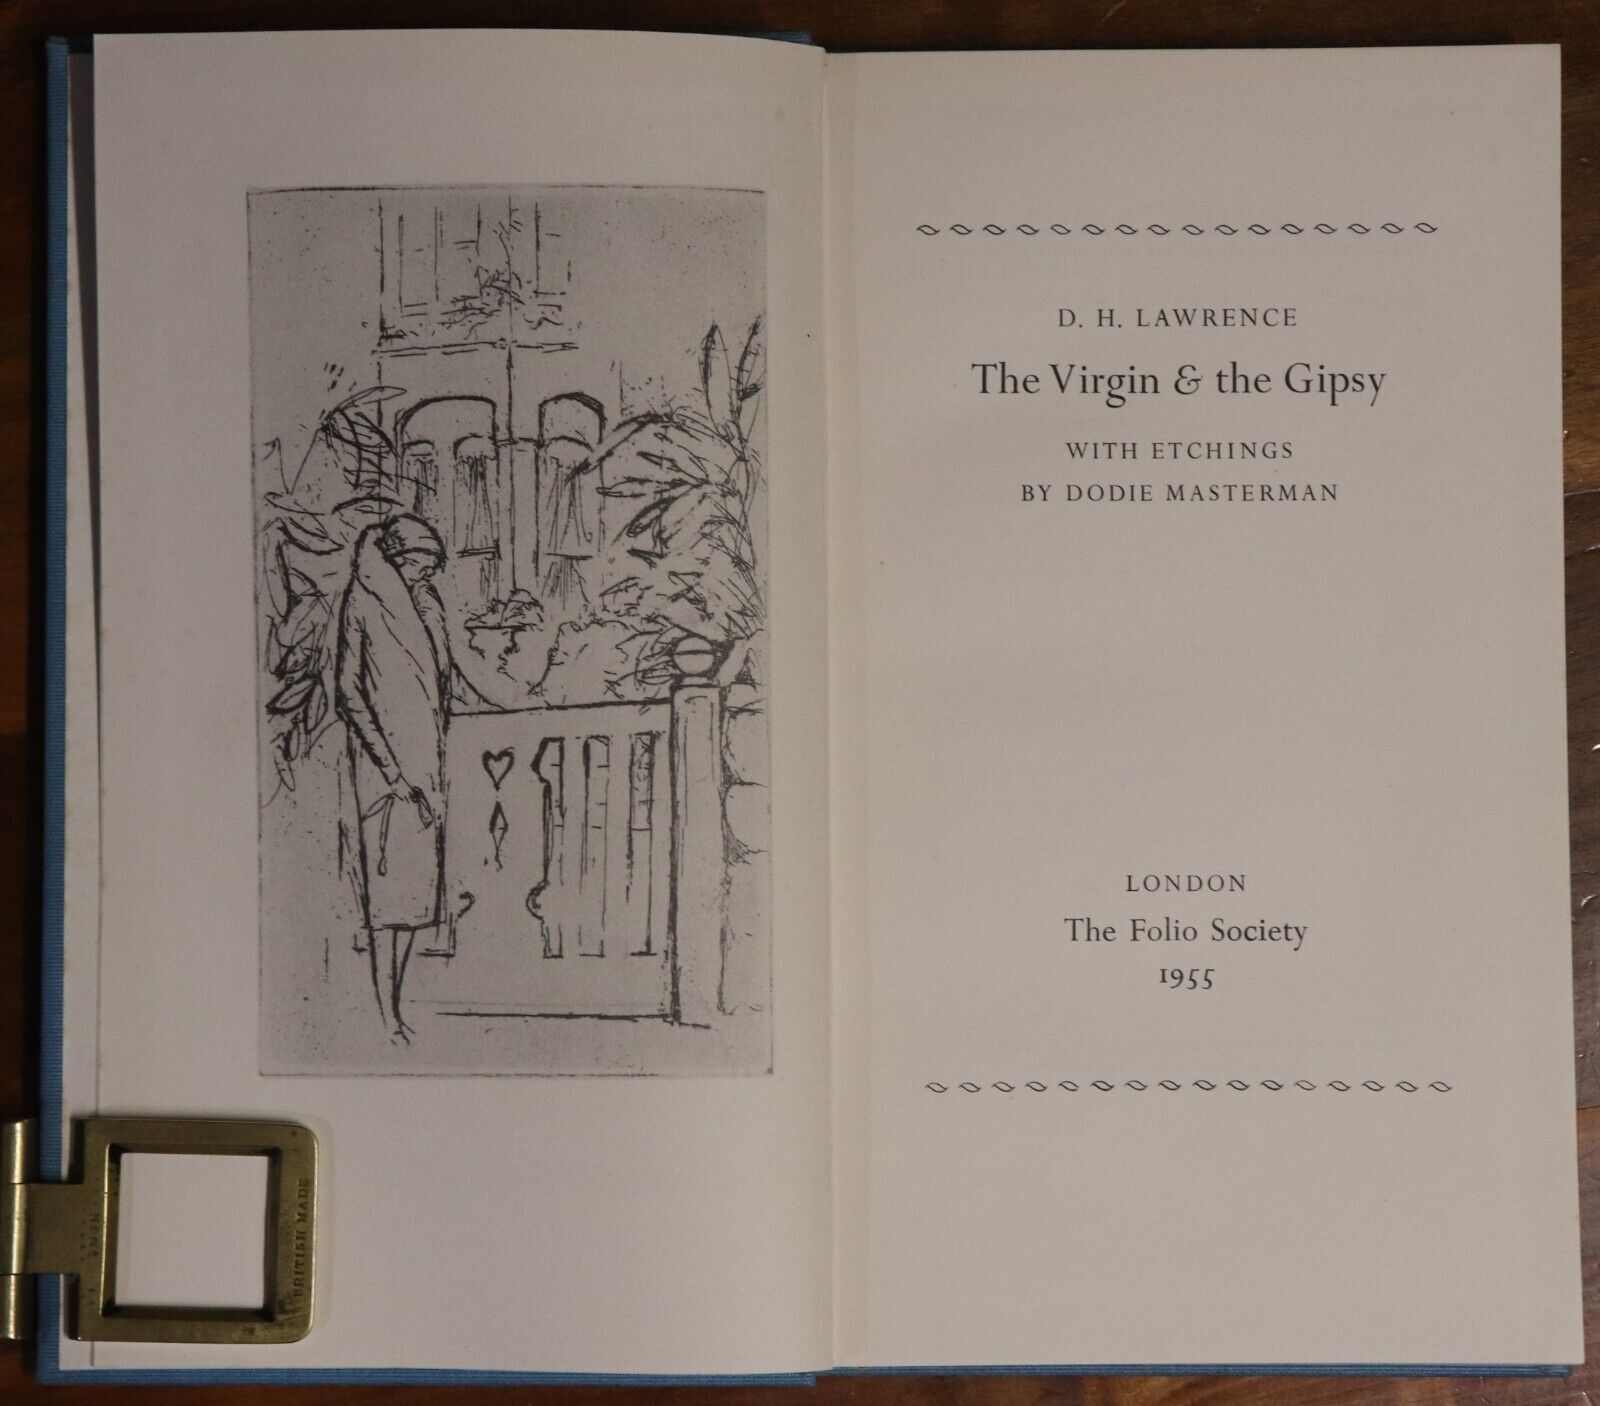 The Virgin & The Gipsy by DH Lawrence - 1955 - Folio Society Literature Book